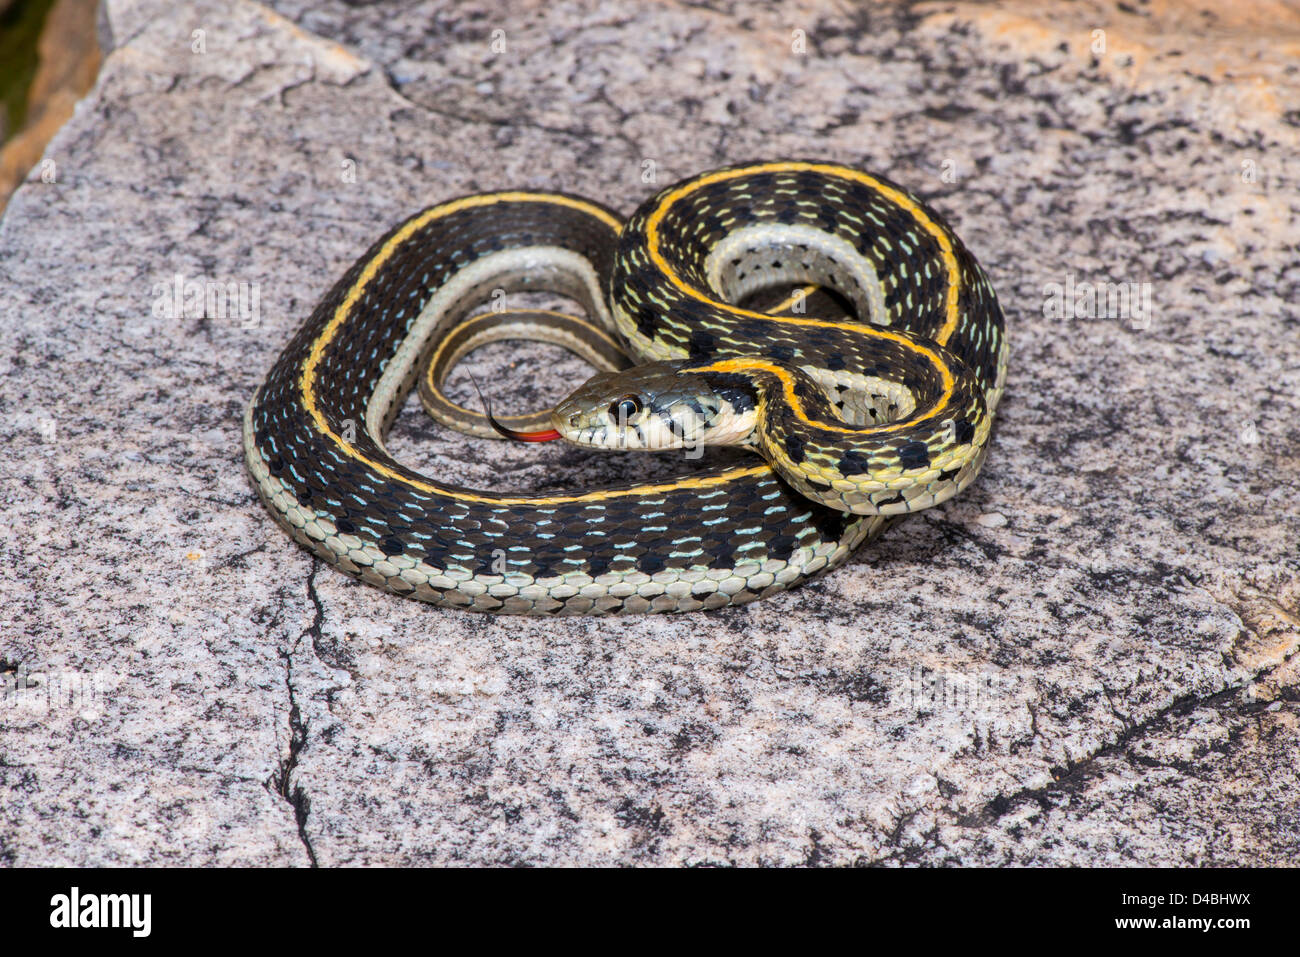 Black-necked Couleuvre rayée Thamnophis cyrtopsis Cochise Stronghold, Dragoon Mountains, Arizona, United States 3 Septembre Banque D'Images